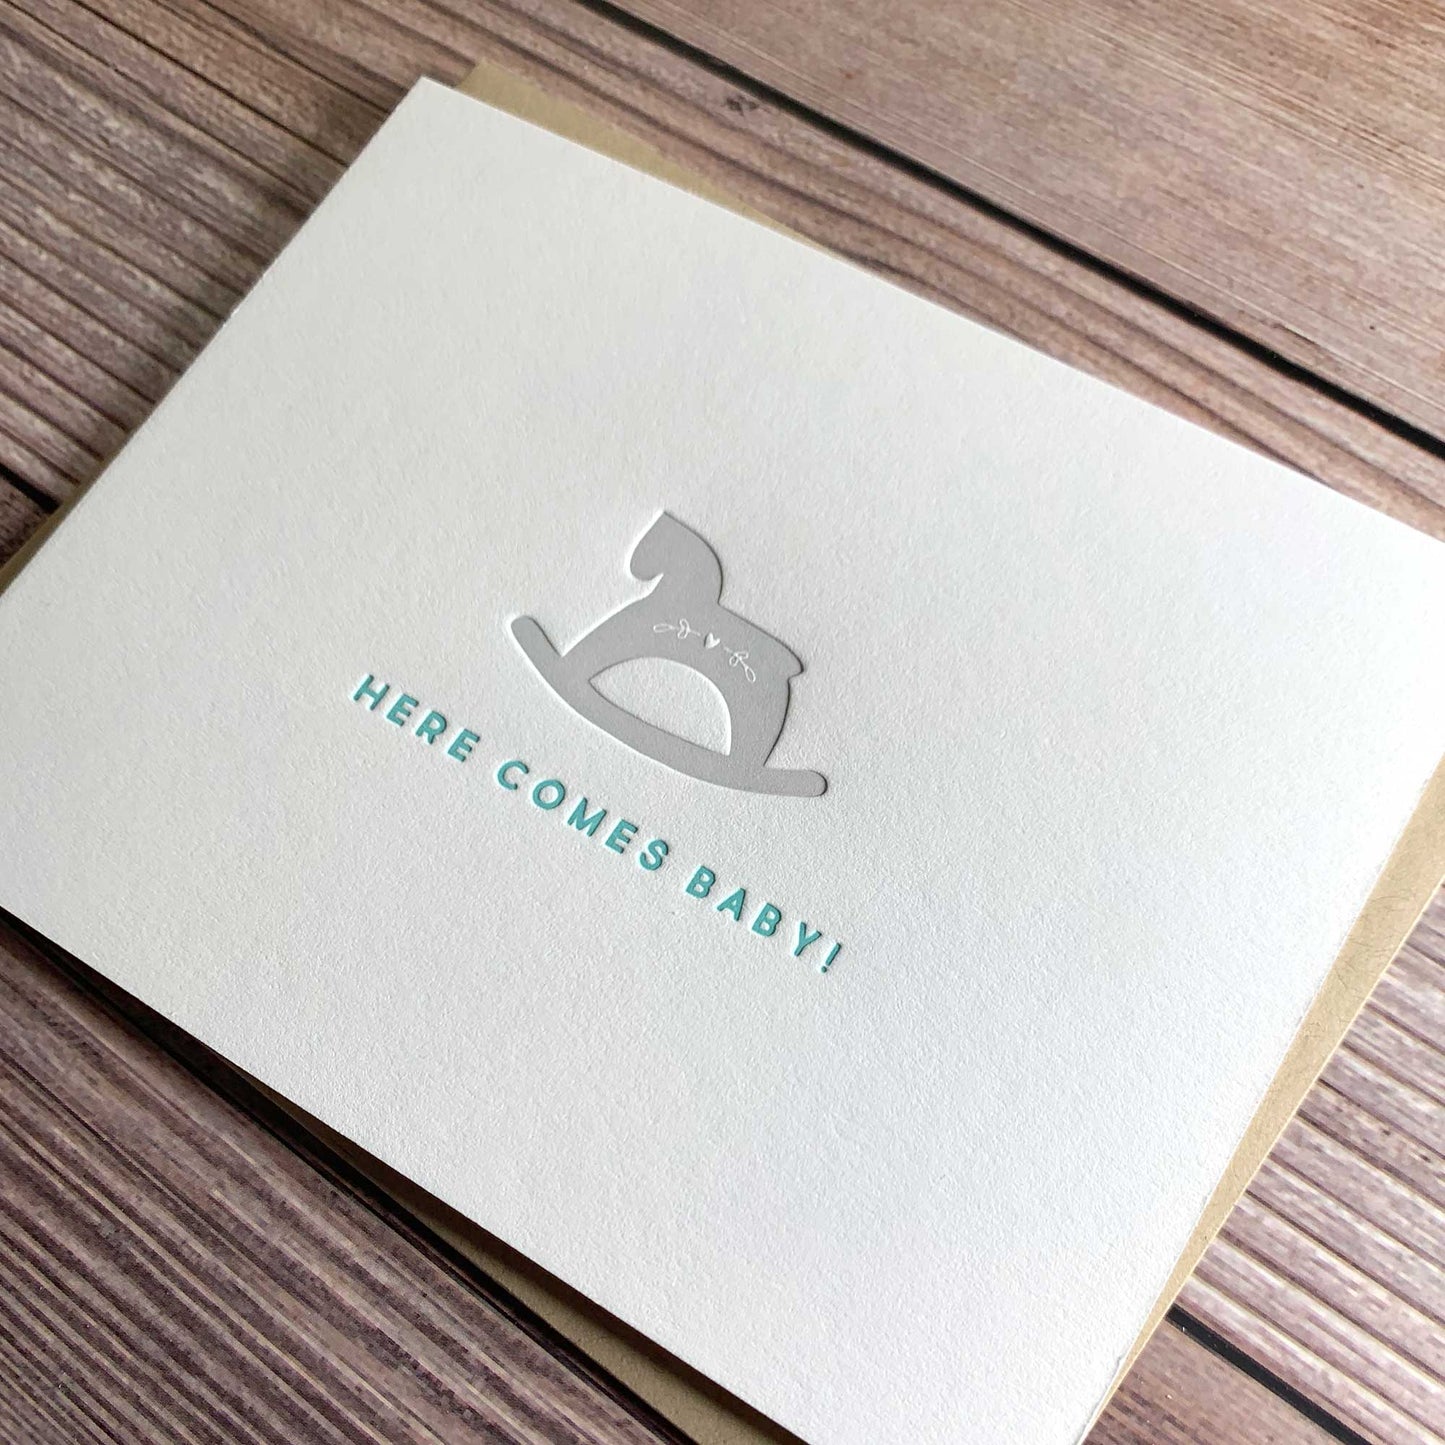 Here Comes Baby, Baby Shower Card, Letterpress printed, view shows letterpress impression, includes envelope